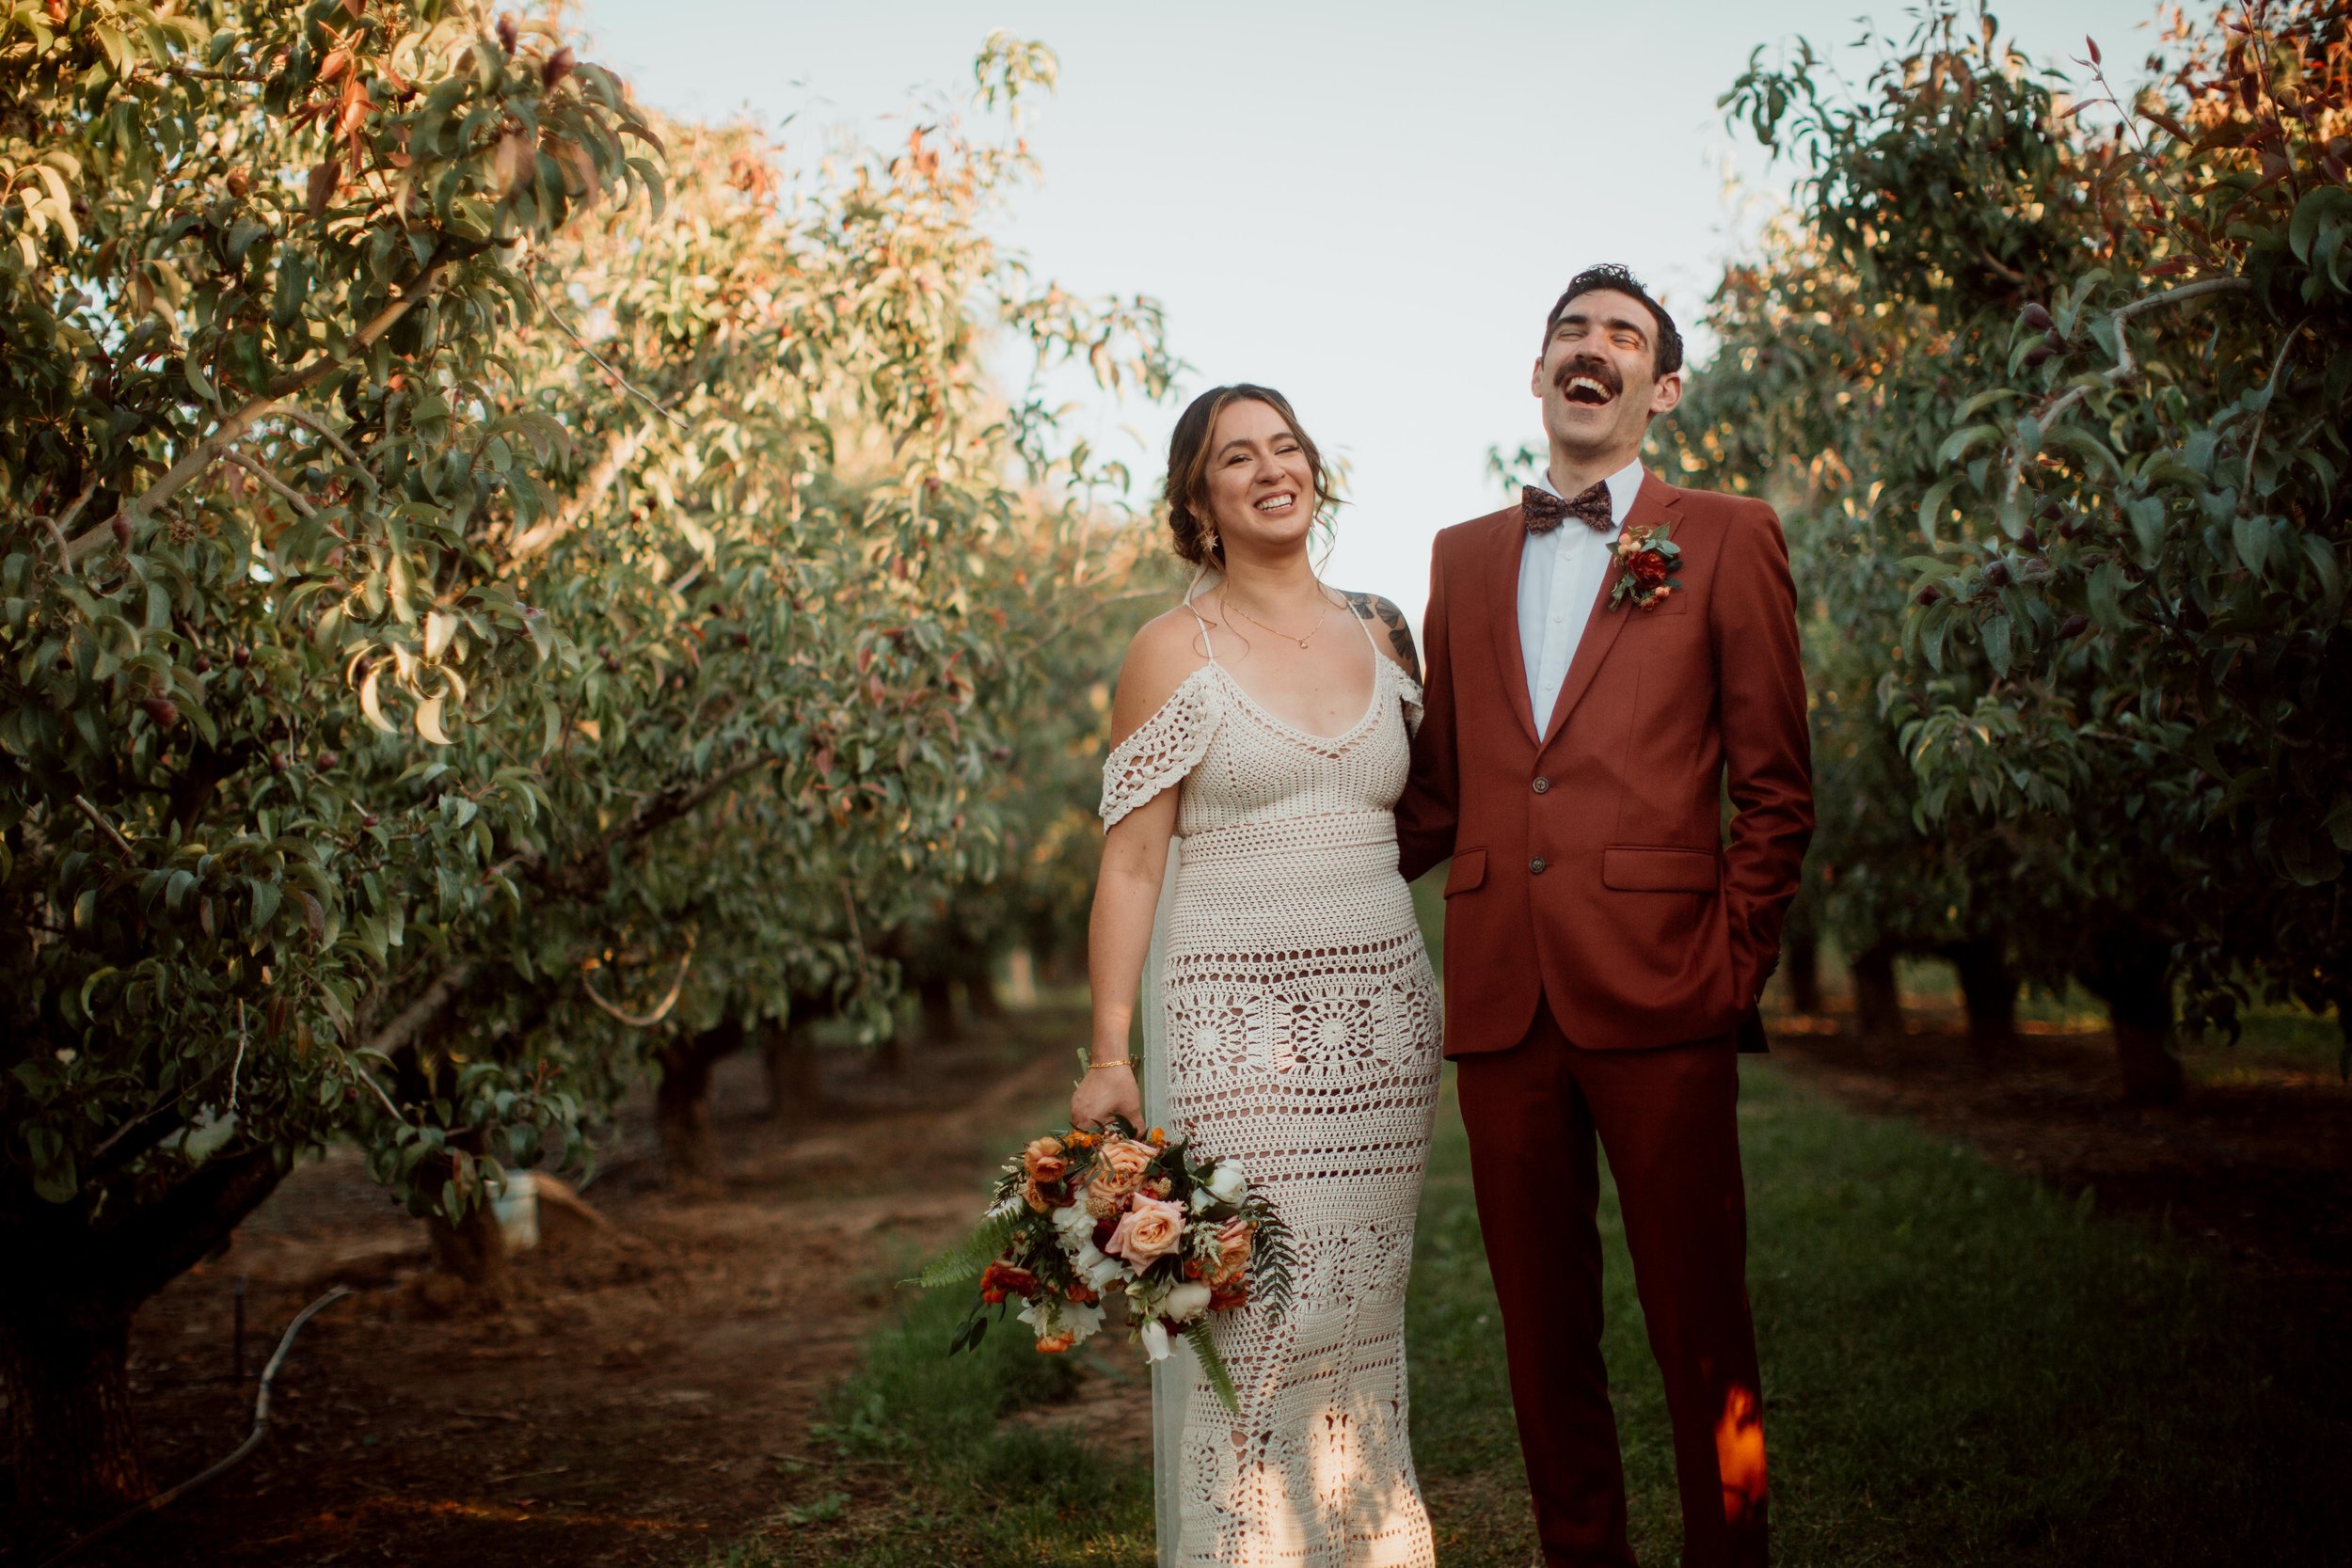 Wedding at The Orchard in Hood River